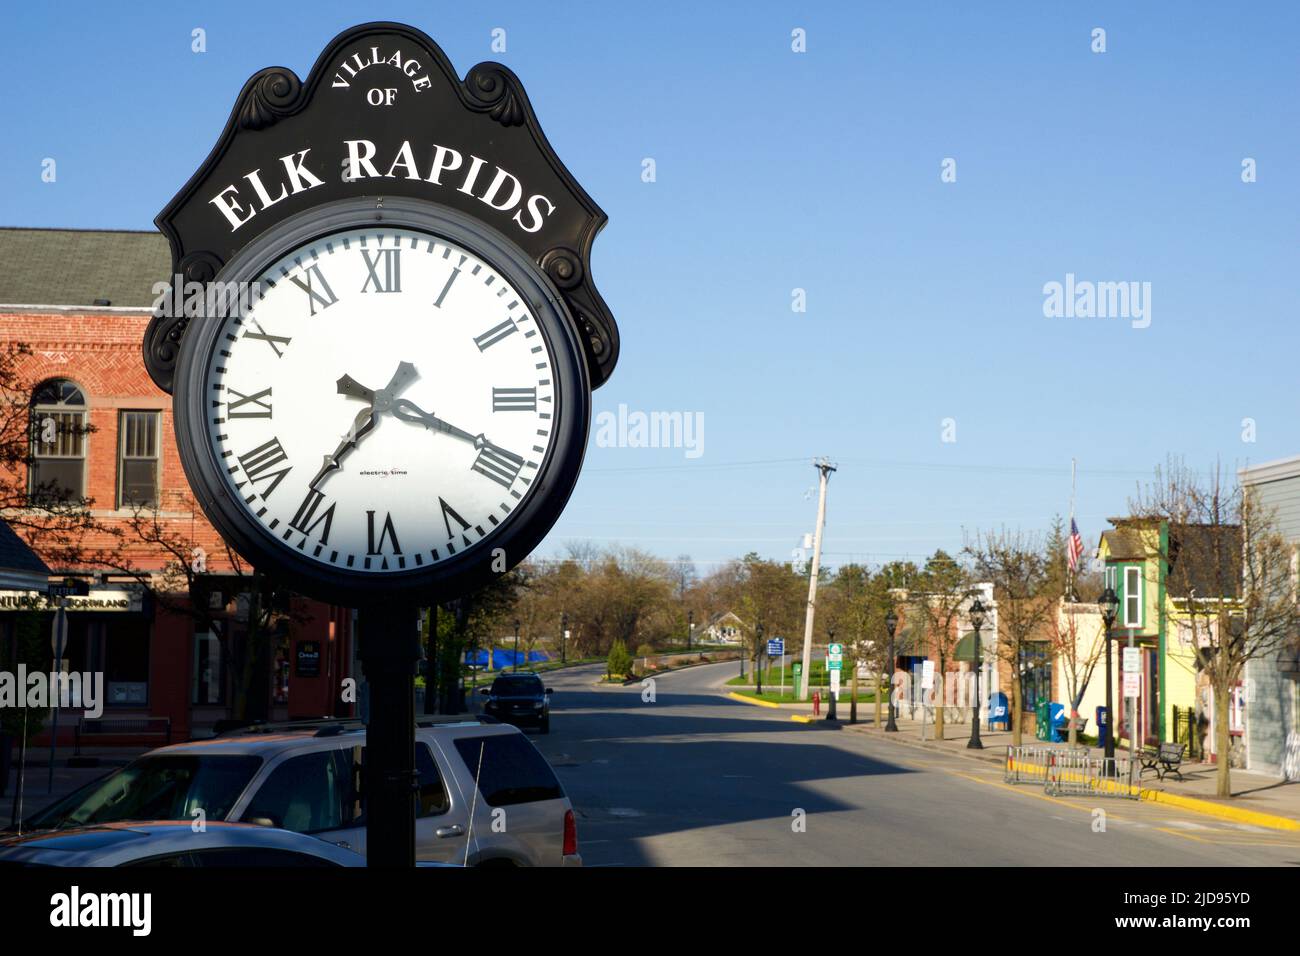 ELK RAPIDS, MICHIGAN, UNITED STATES - MAY 16, 2018: Main street in the small American town of Elk Rapids in northern Michigan with old longcase clock Stock Photo